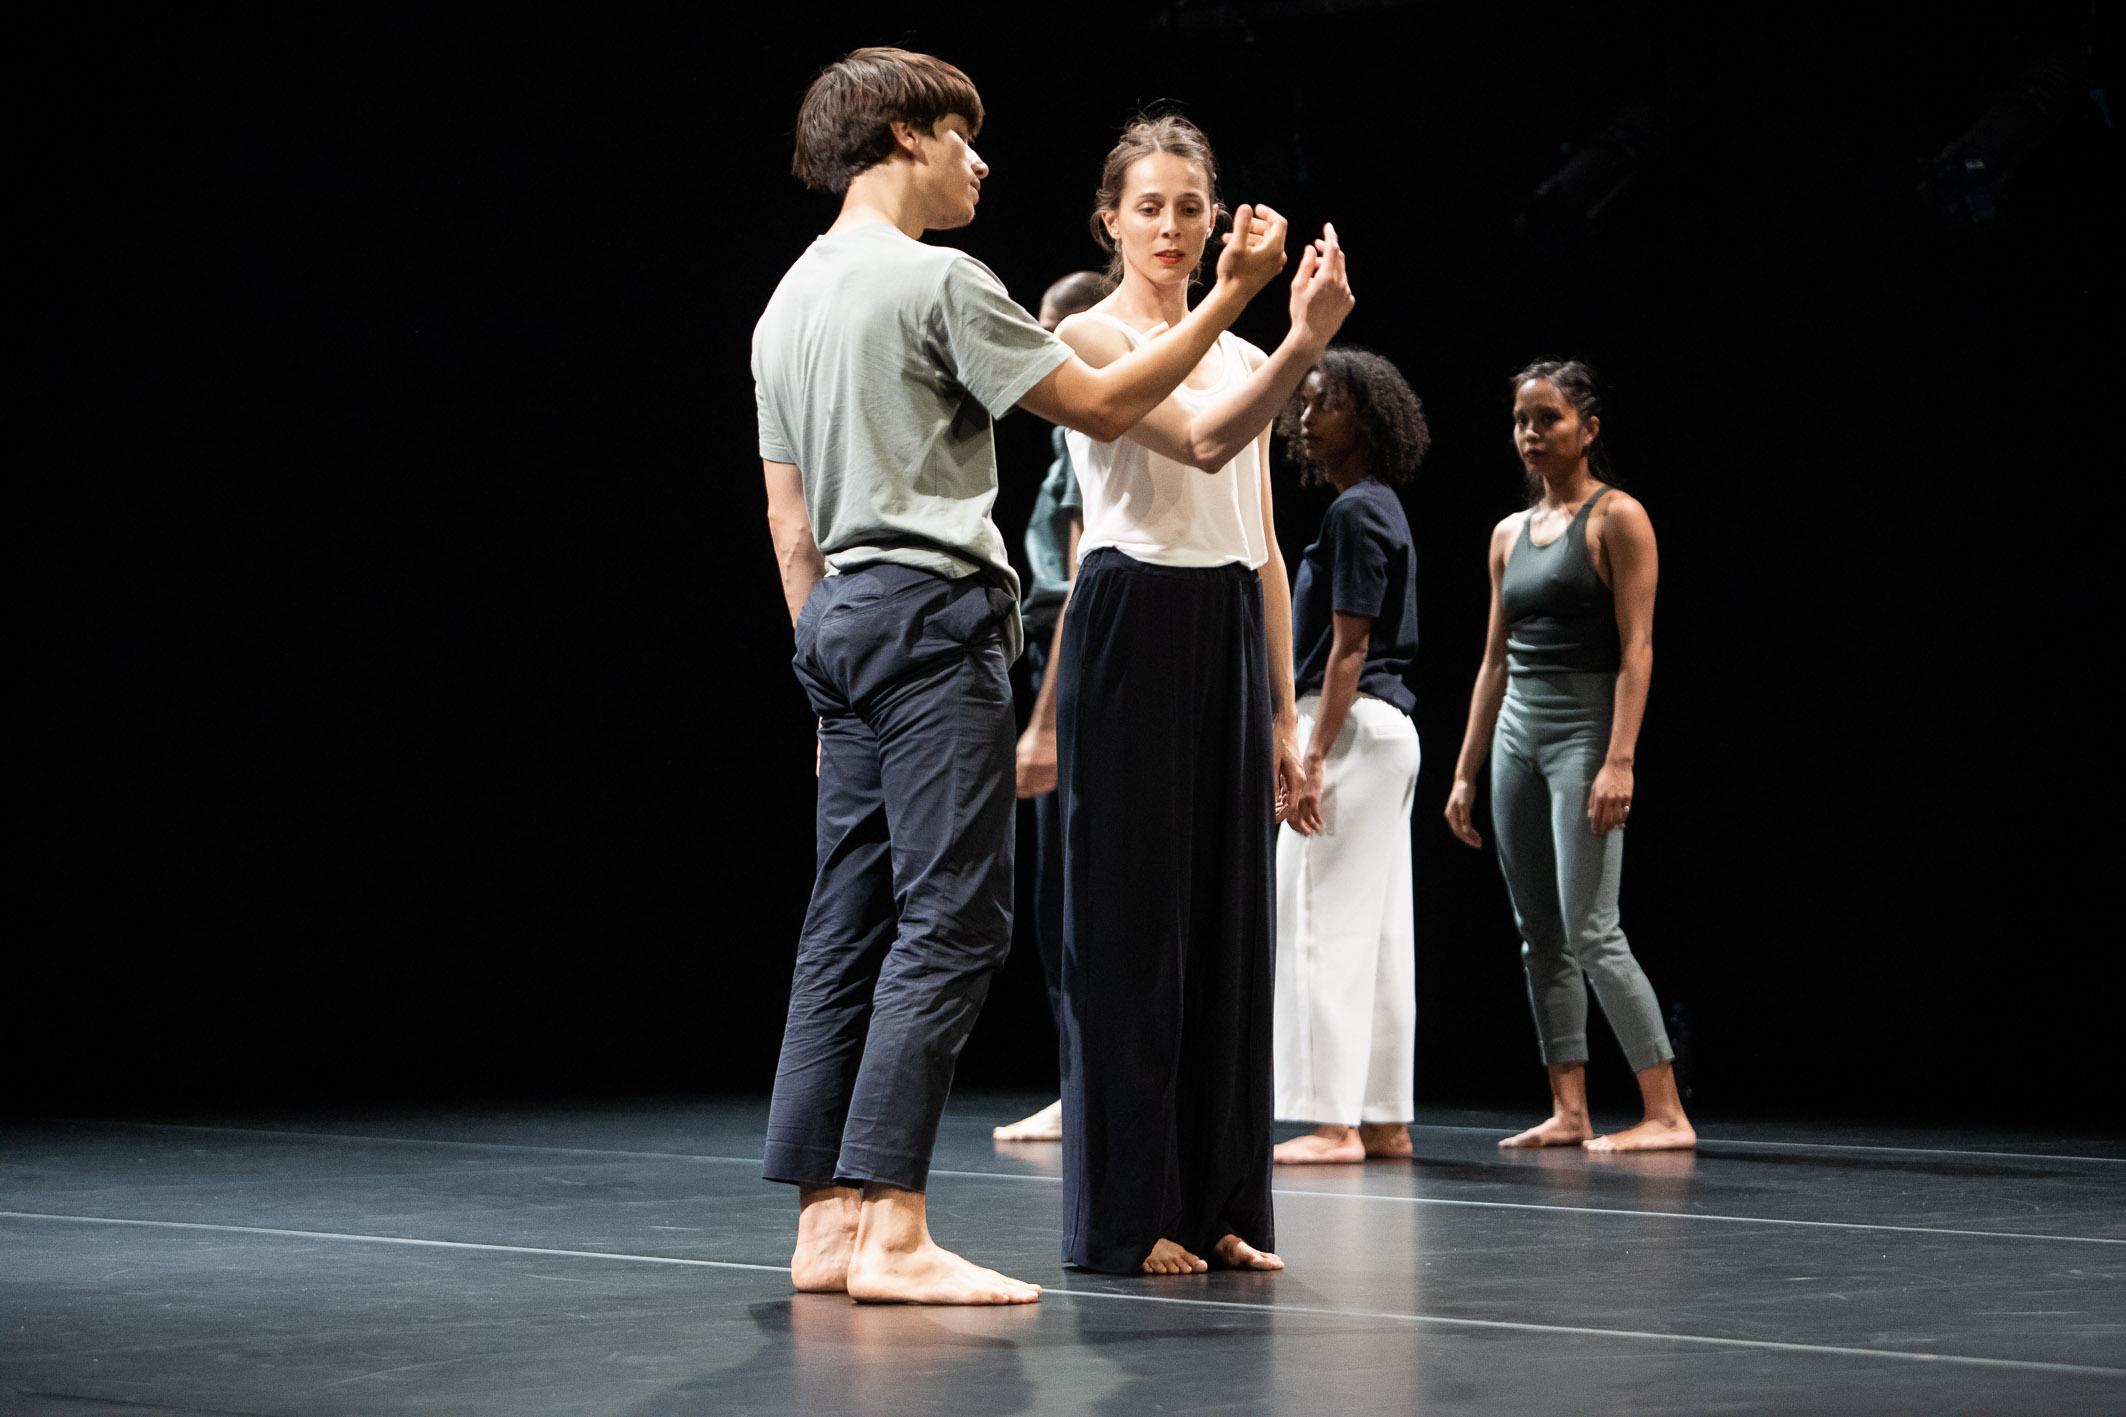 Dancers standing in different directions, with their arm rising the same way